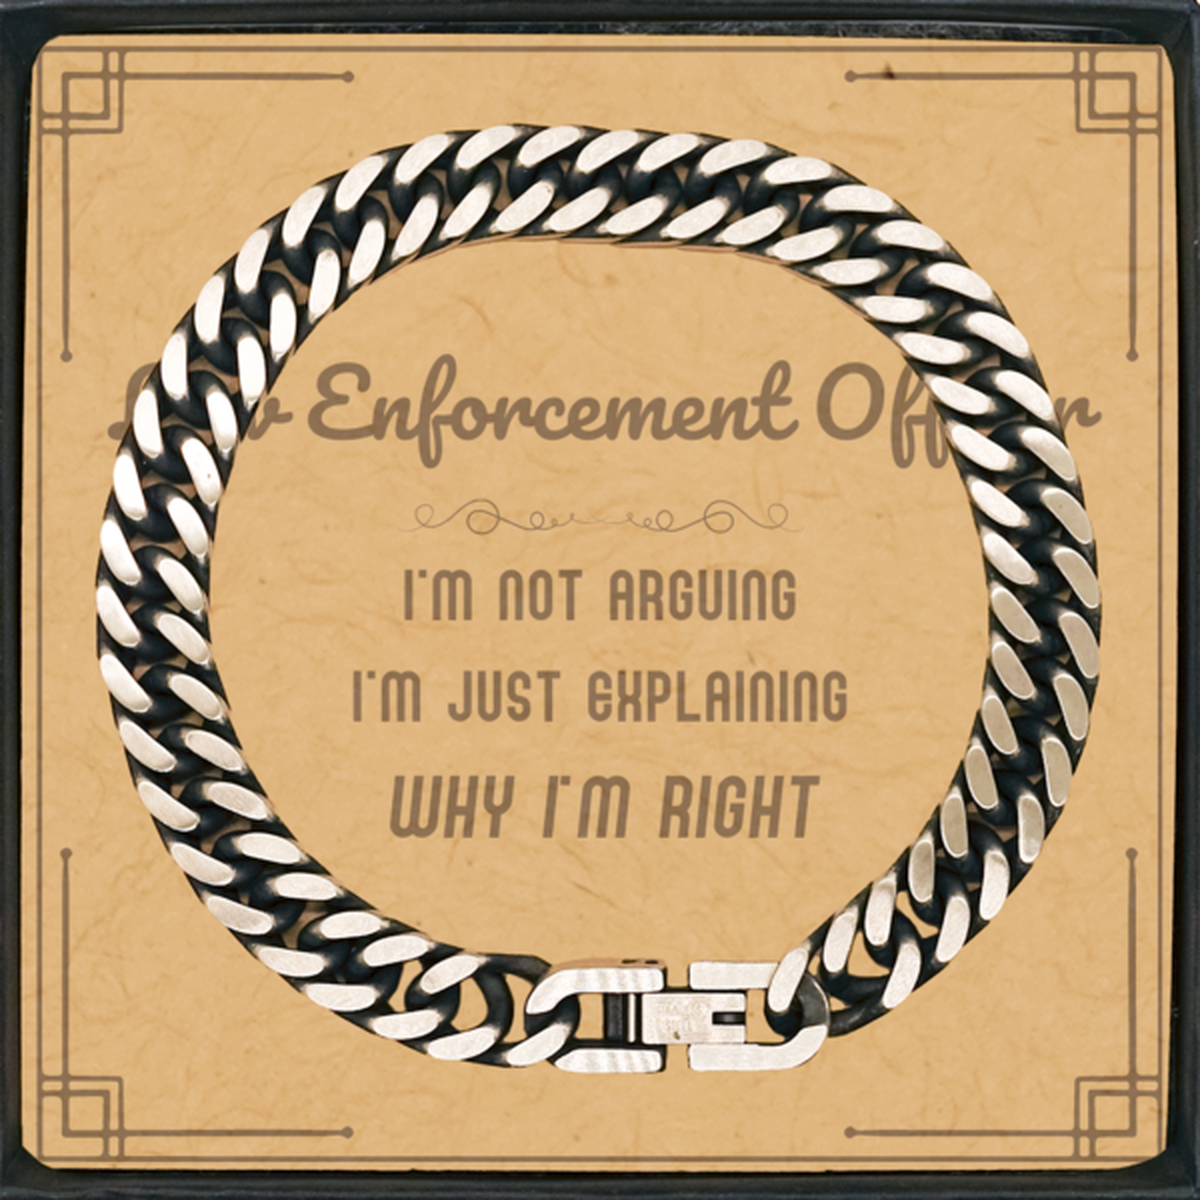 Law Enforcement Officer I'm not Arguing. I'm Just Explaining Why I'm RIGHT Cuban Link Chain Bracelet, Funny Saying Quote Law Enforcement Officer Gifts For Law Enforcement Officer Message Card Graduation Birthday Christmas Gifts for Men Women Coworker